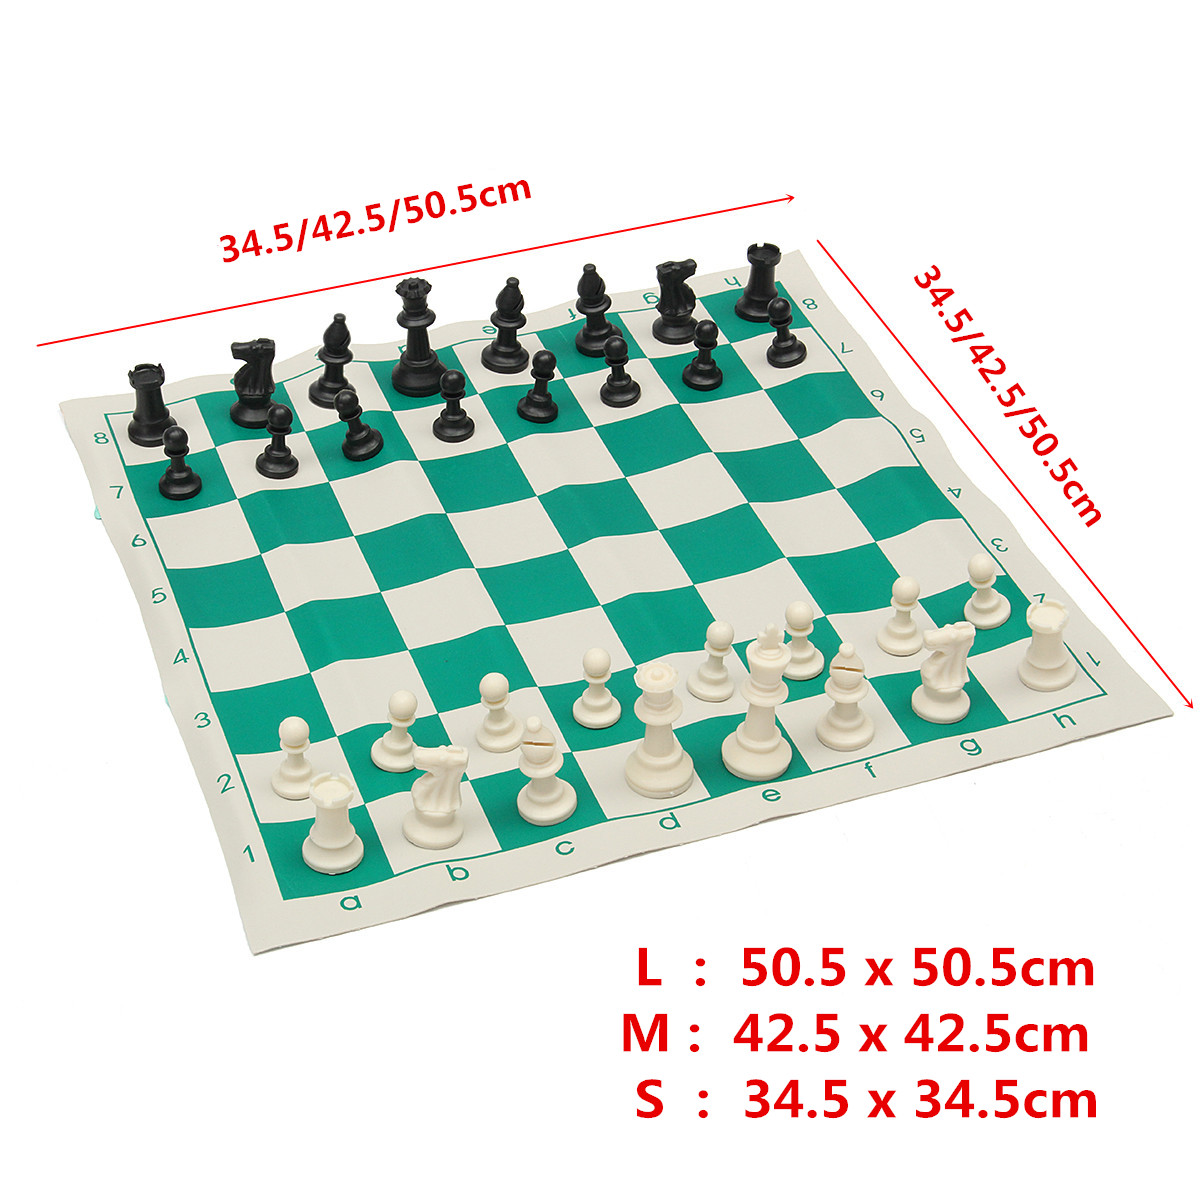 Plastic-Gambit-Tournament-Chess-Set-Roll-up-Mat-And-Bag-Camping-Travel-Gifts-Portable-Travelling-New-1641520-5